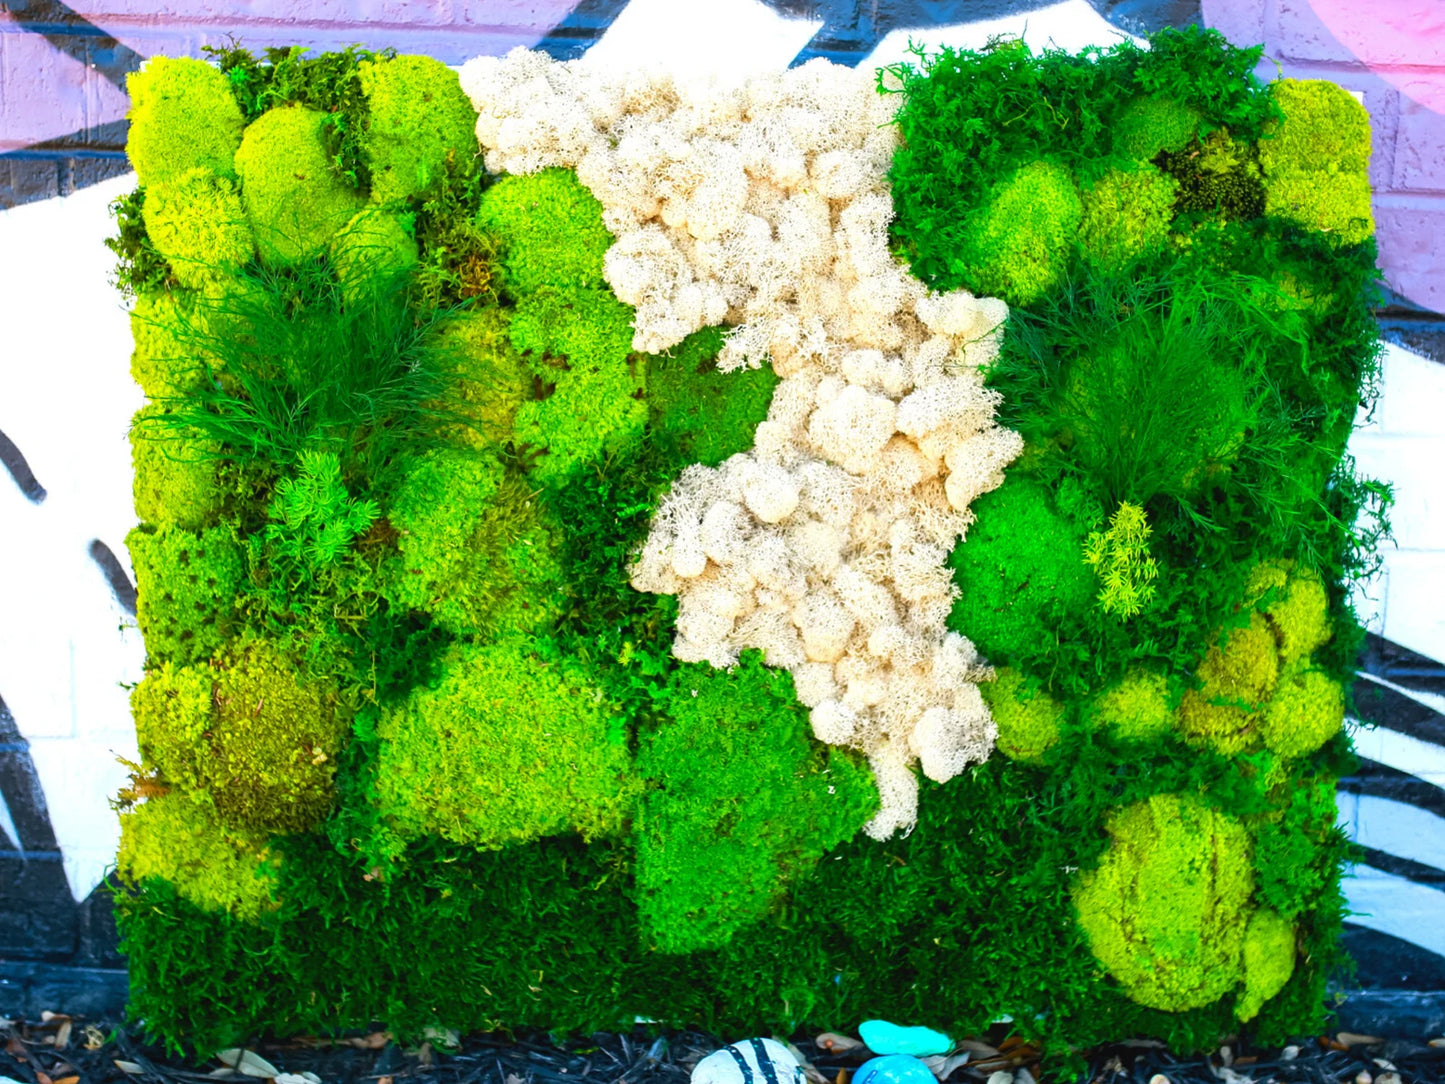 Preserved Moss White Reindeer Moss, Pillow and Mood Moss